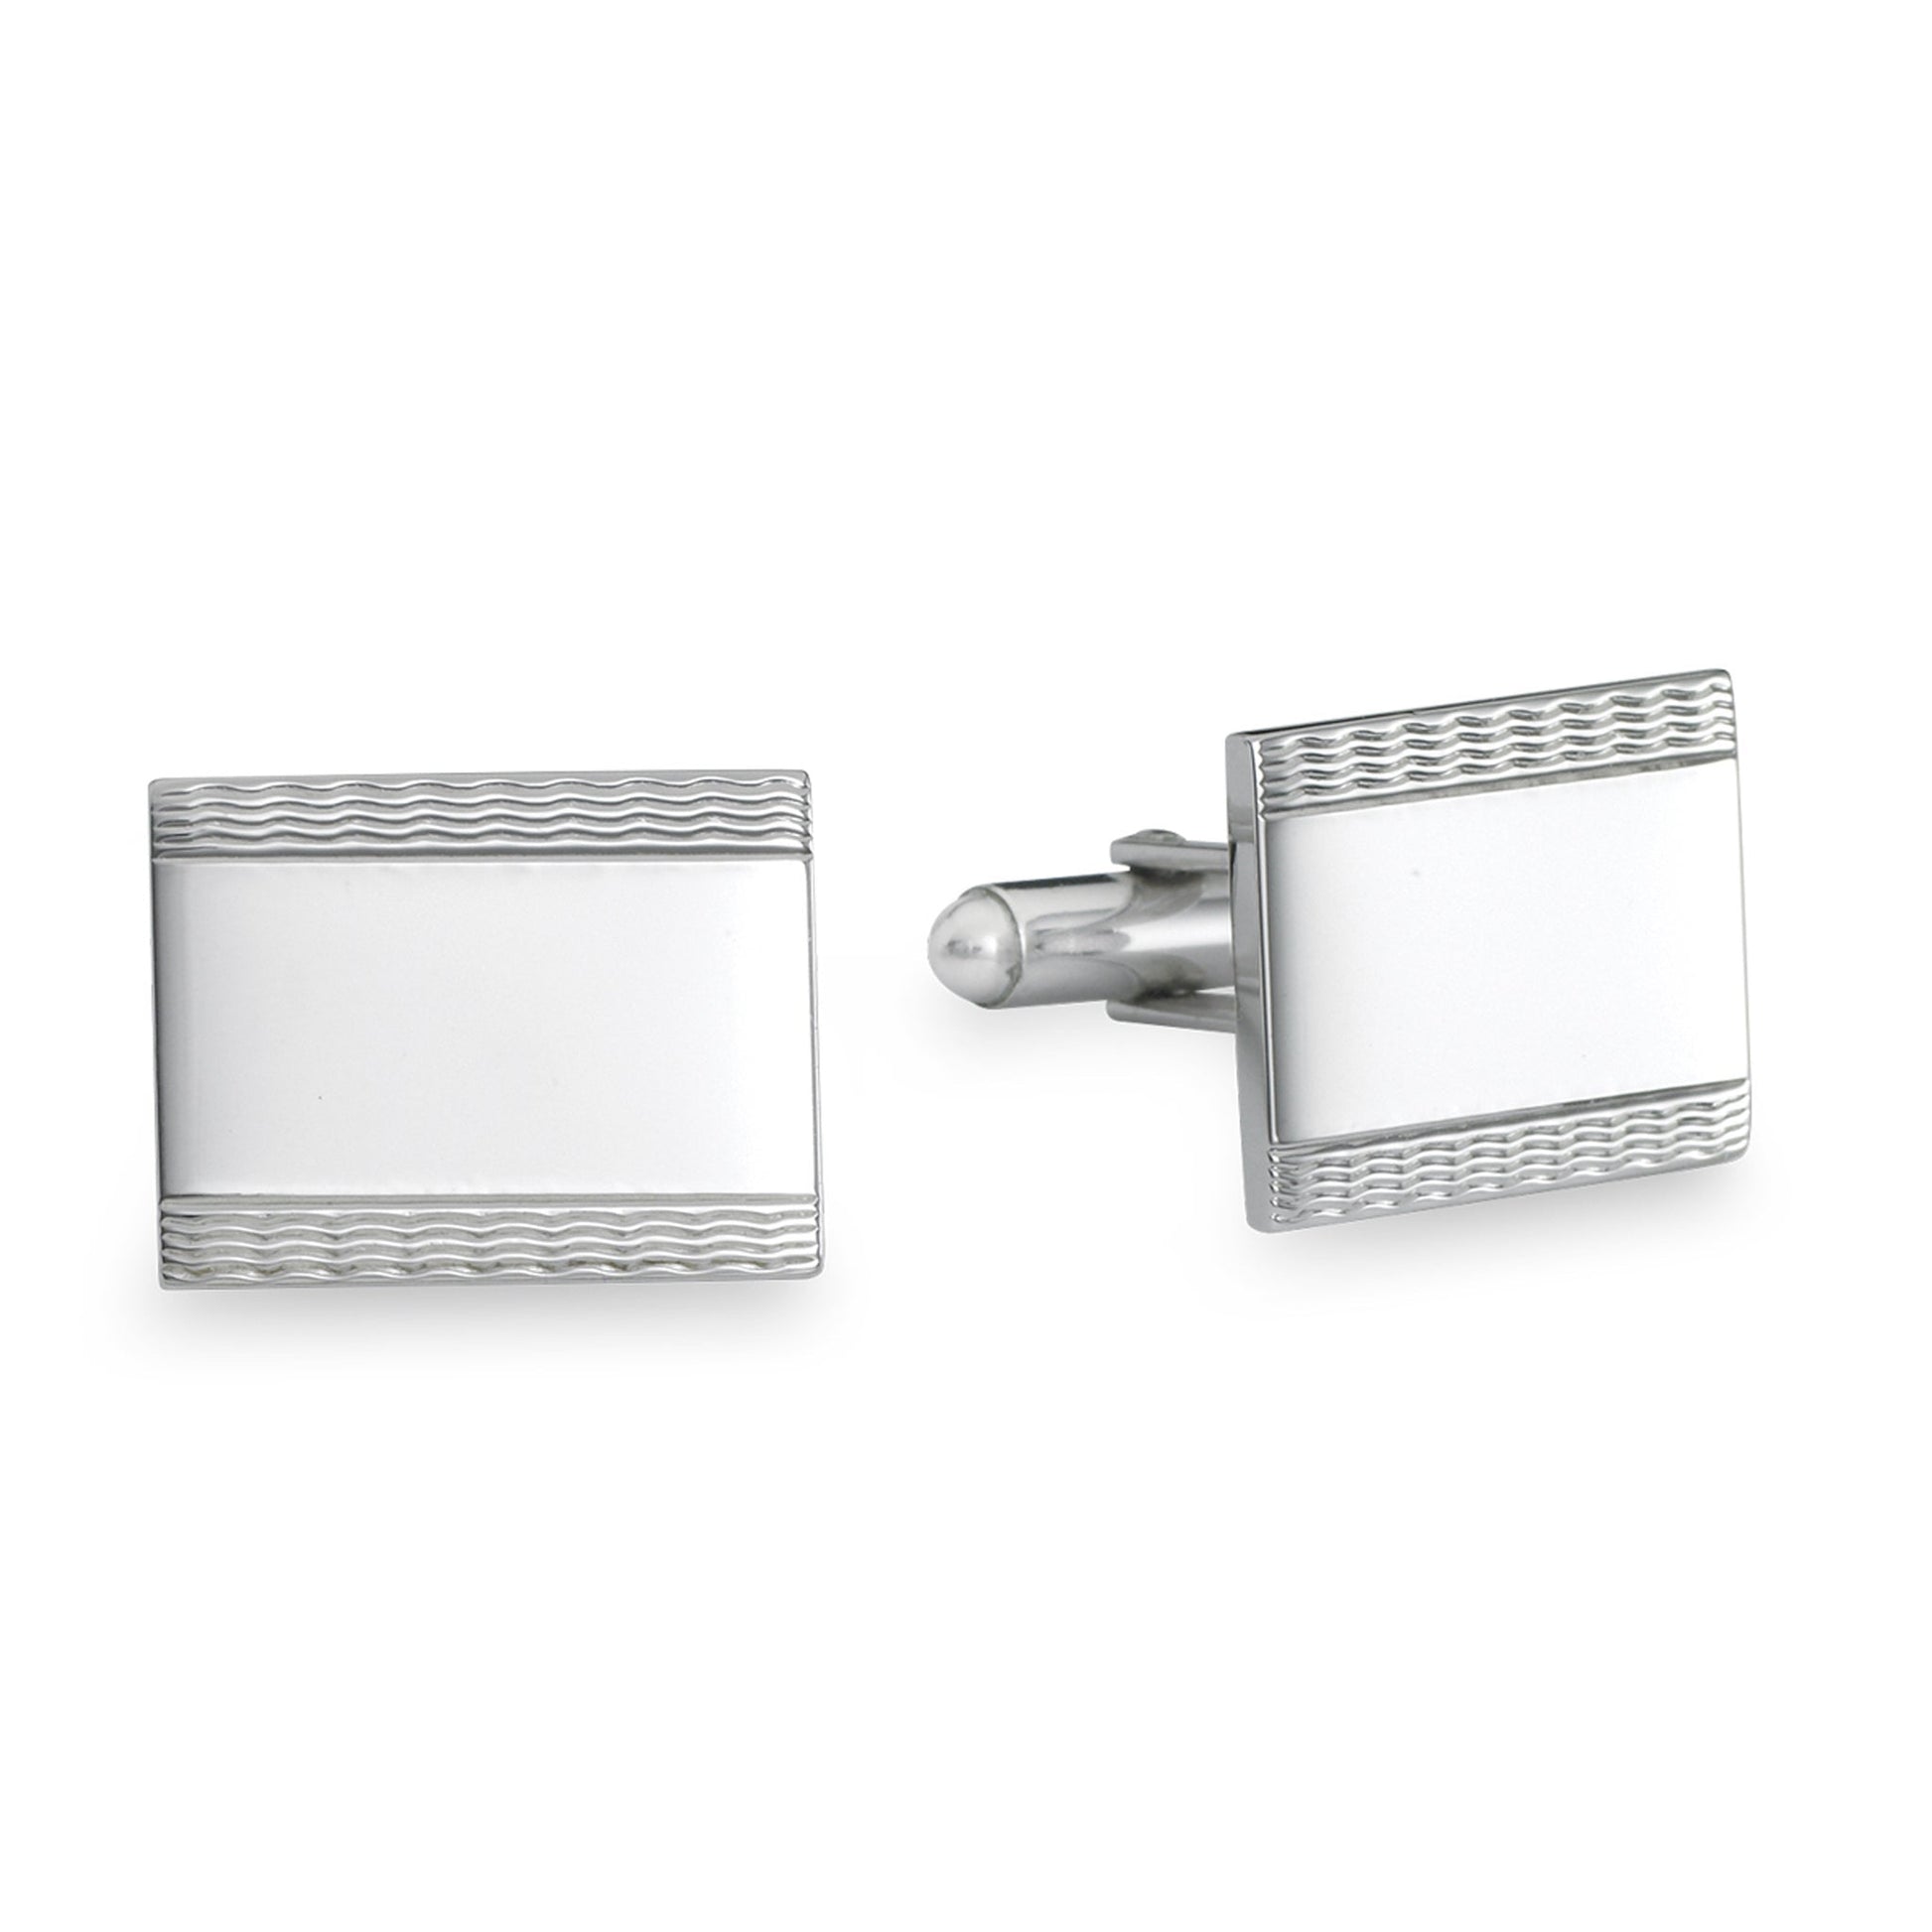 A sterling silve engine-turned rectangle cufflinks displayed on a neutral white background.